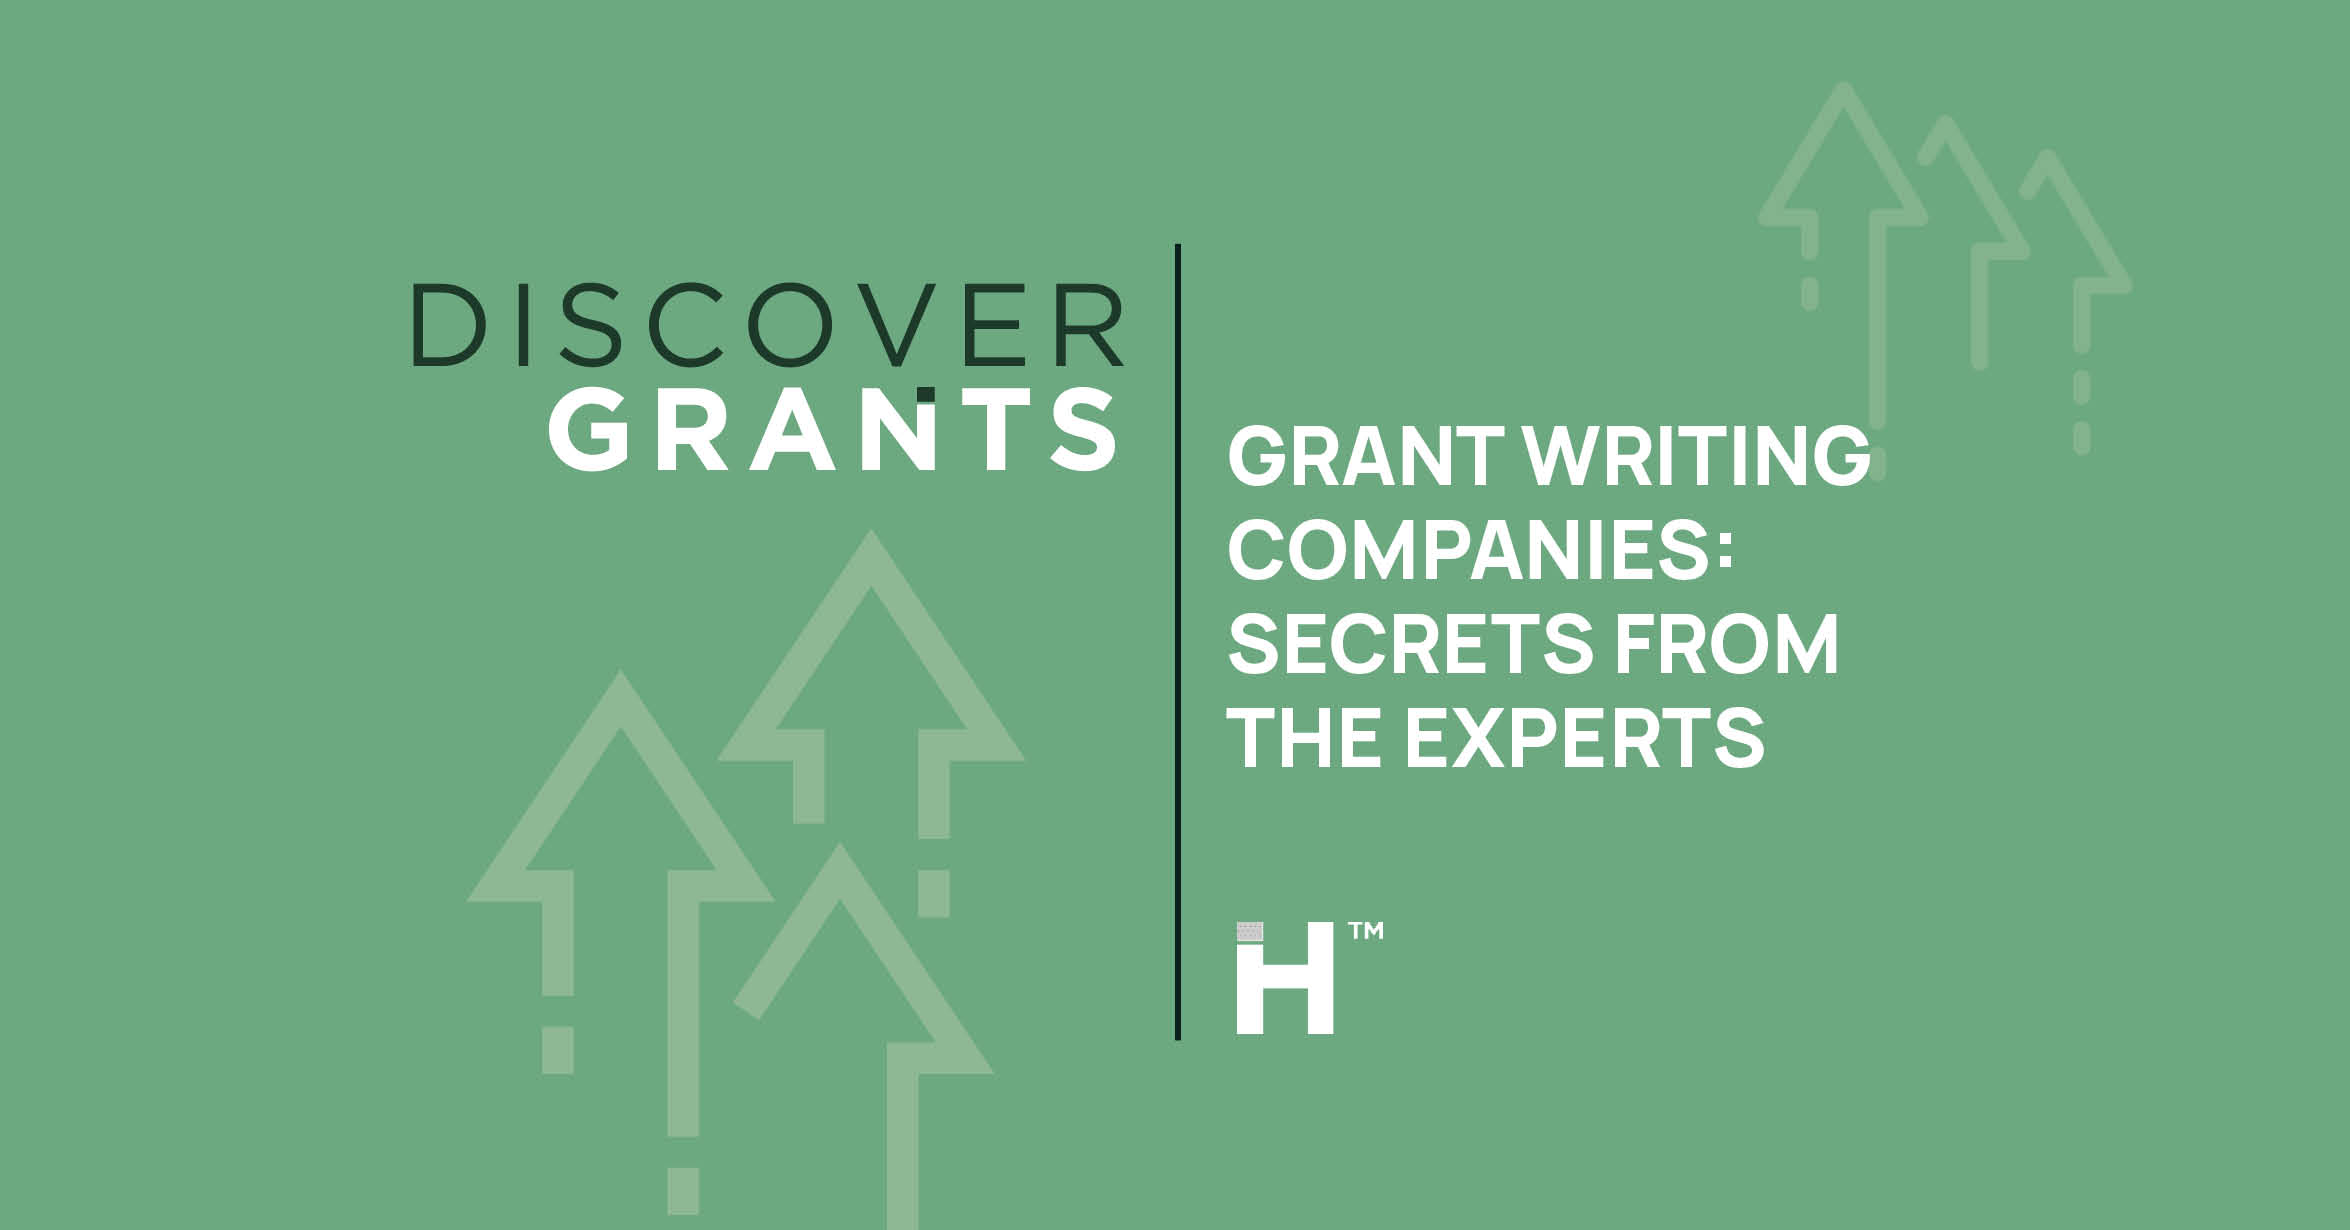 Grant Writing Companies: Secrets from the Experts